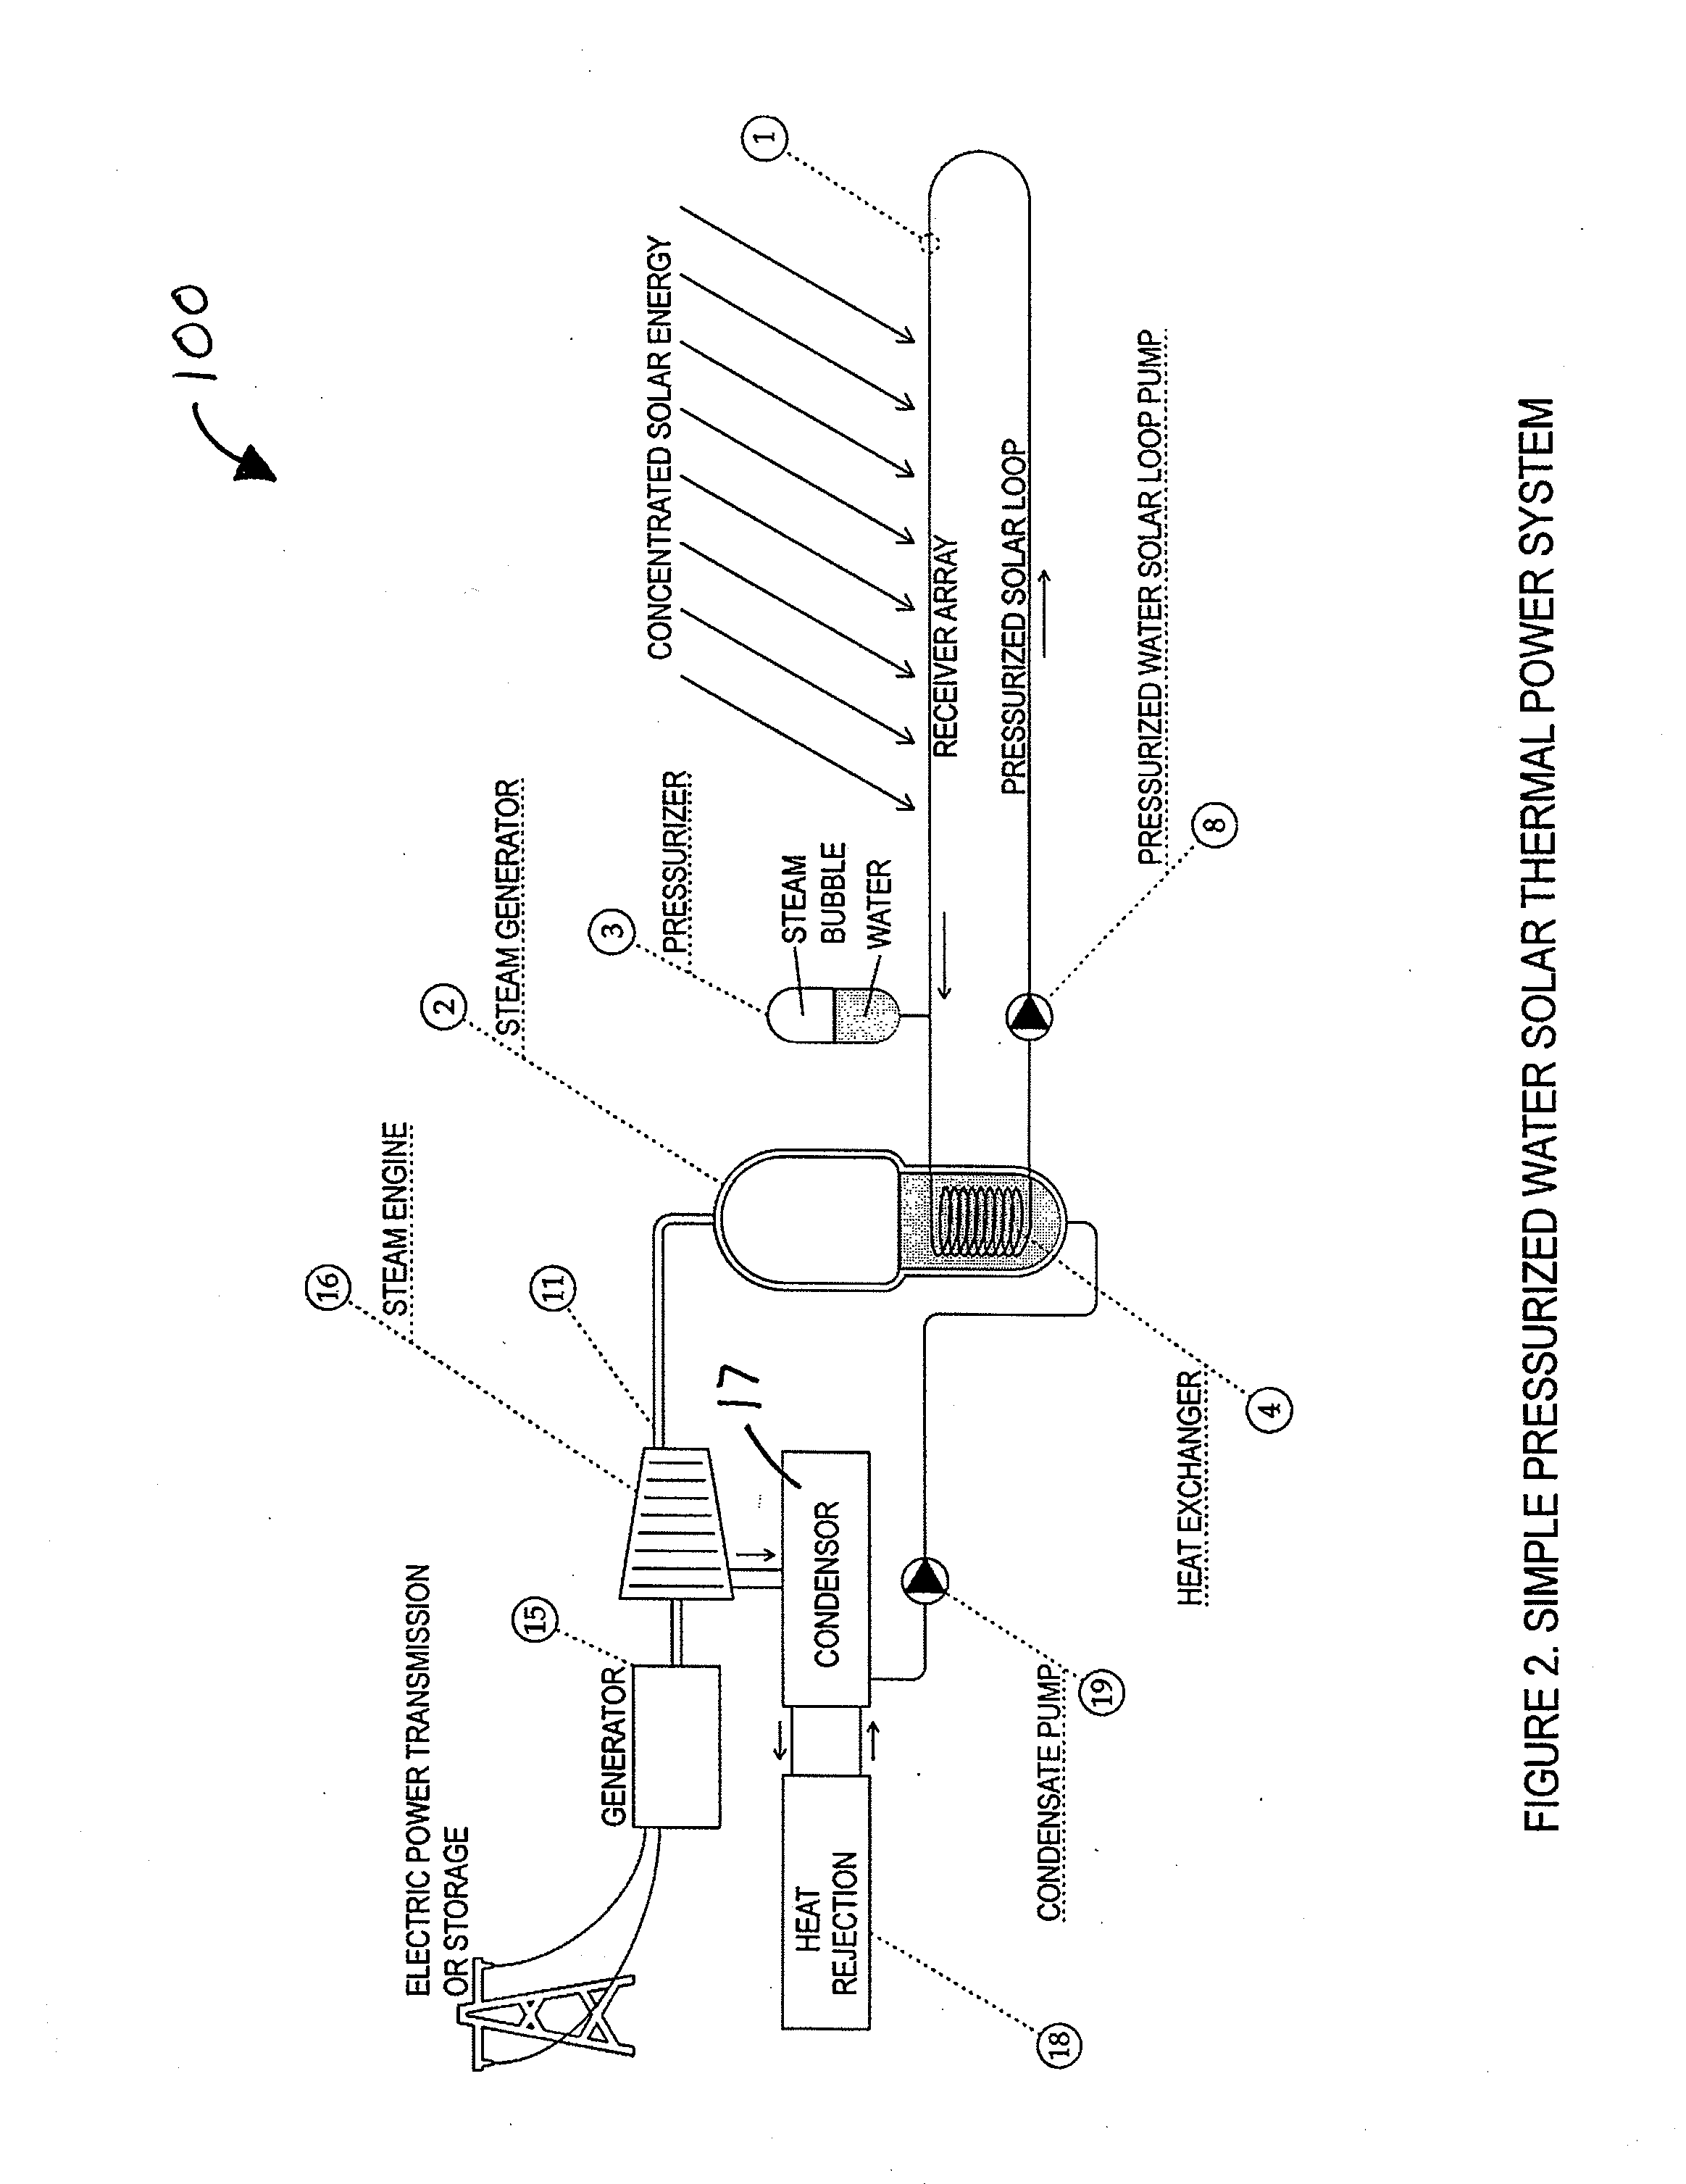 System and Method for Generating Steam Using a Solar Power Source in Conjunction with a Geothermal Power Source